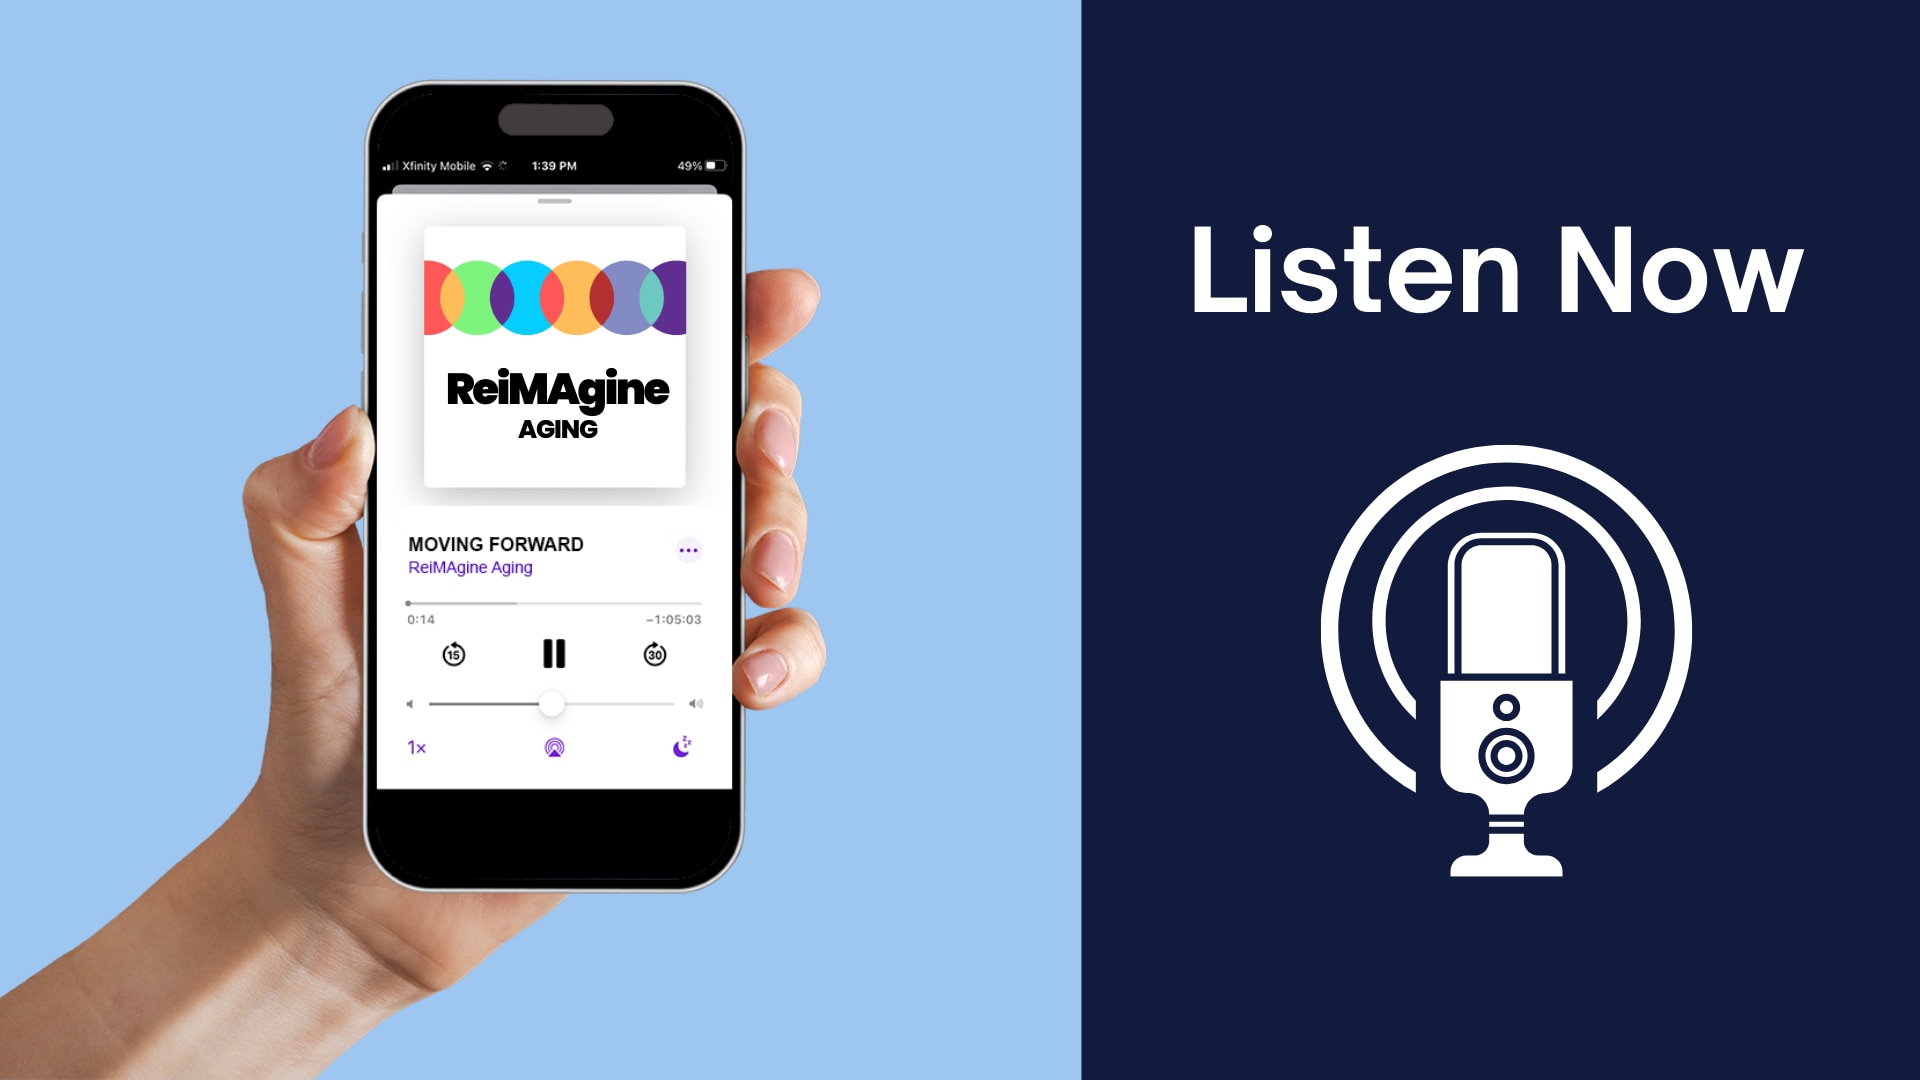 Listen to the podcast ReiMAgine Aging on Spotify, Apple Podcasts, or reimagineaging.net.